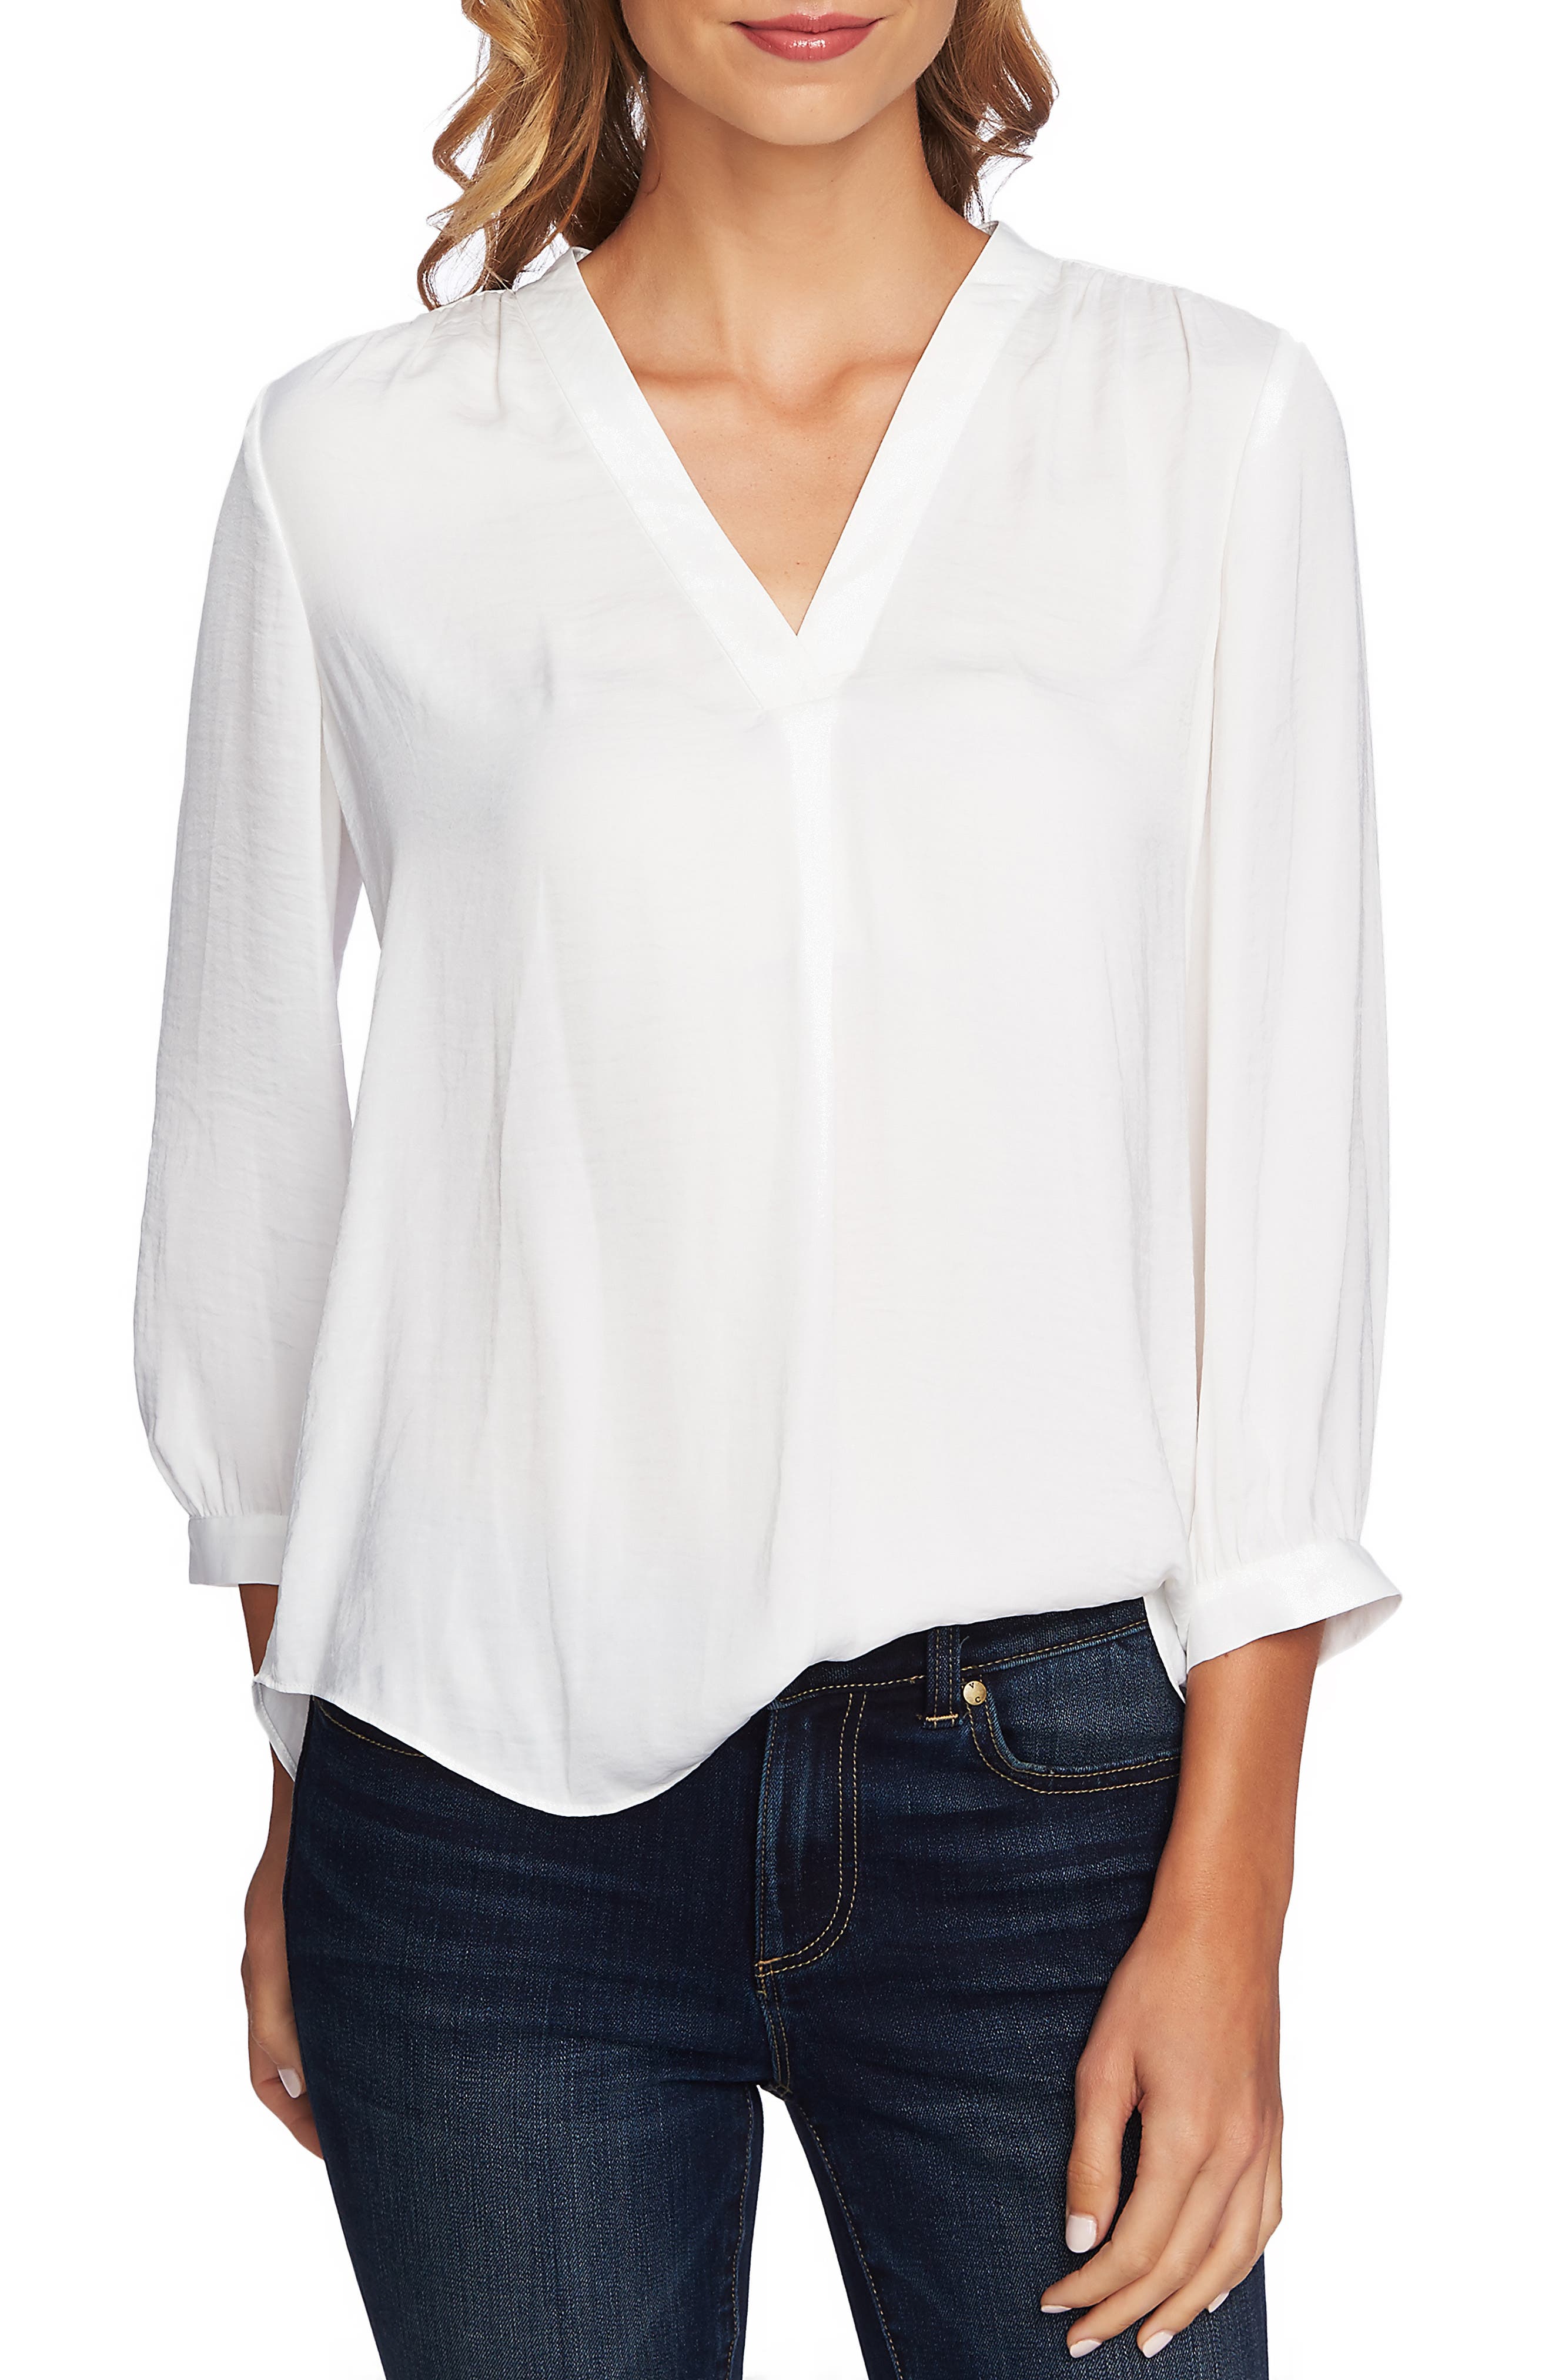 Comma Blouse Top cream business style Fashion Tops Blouse Tops 